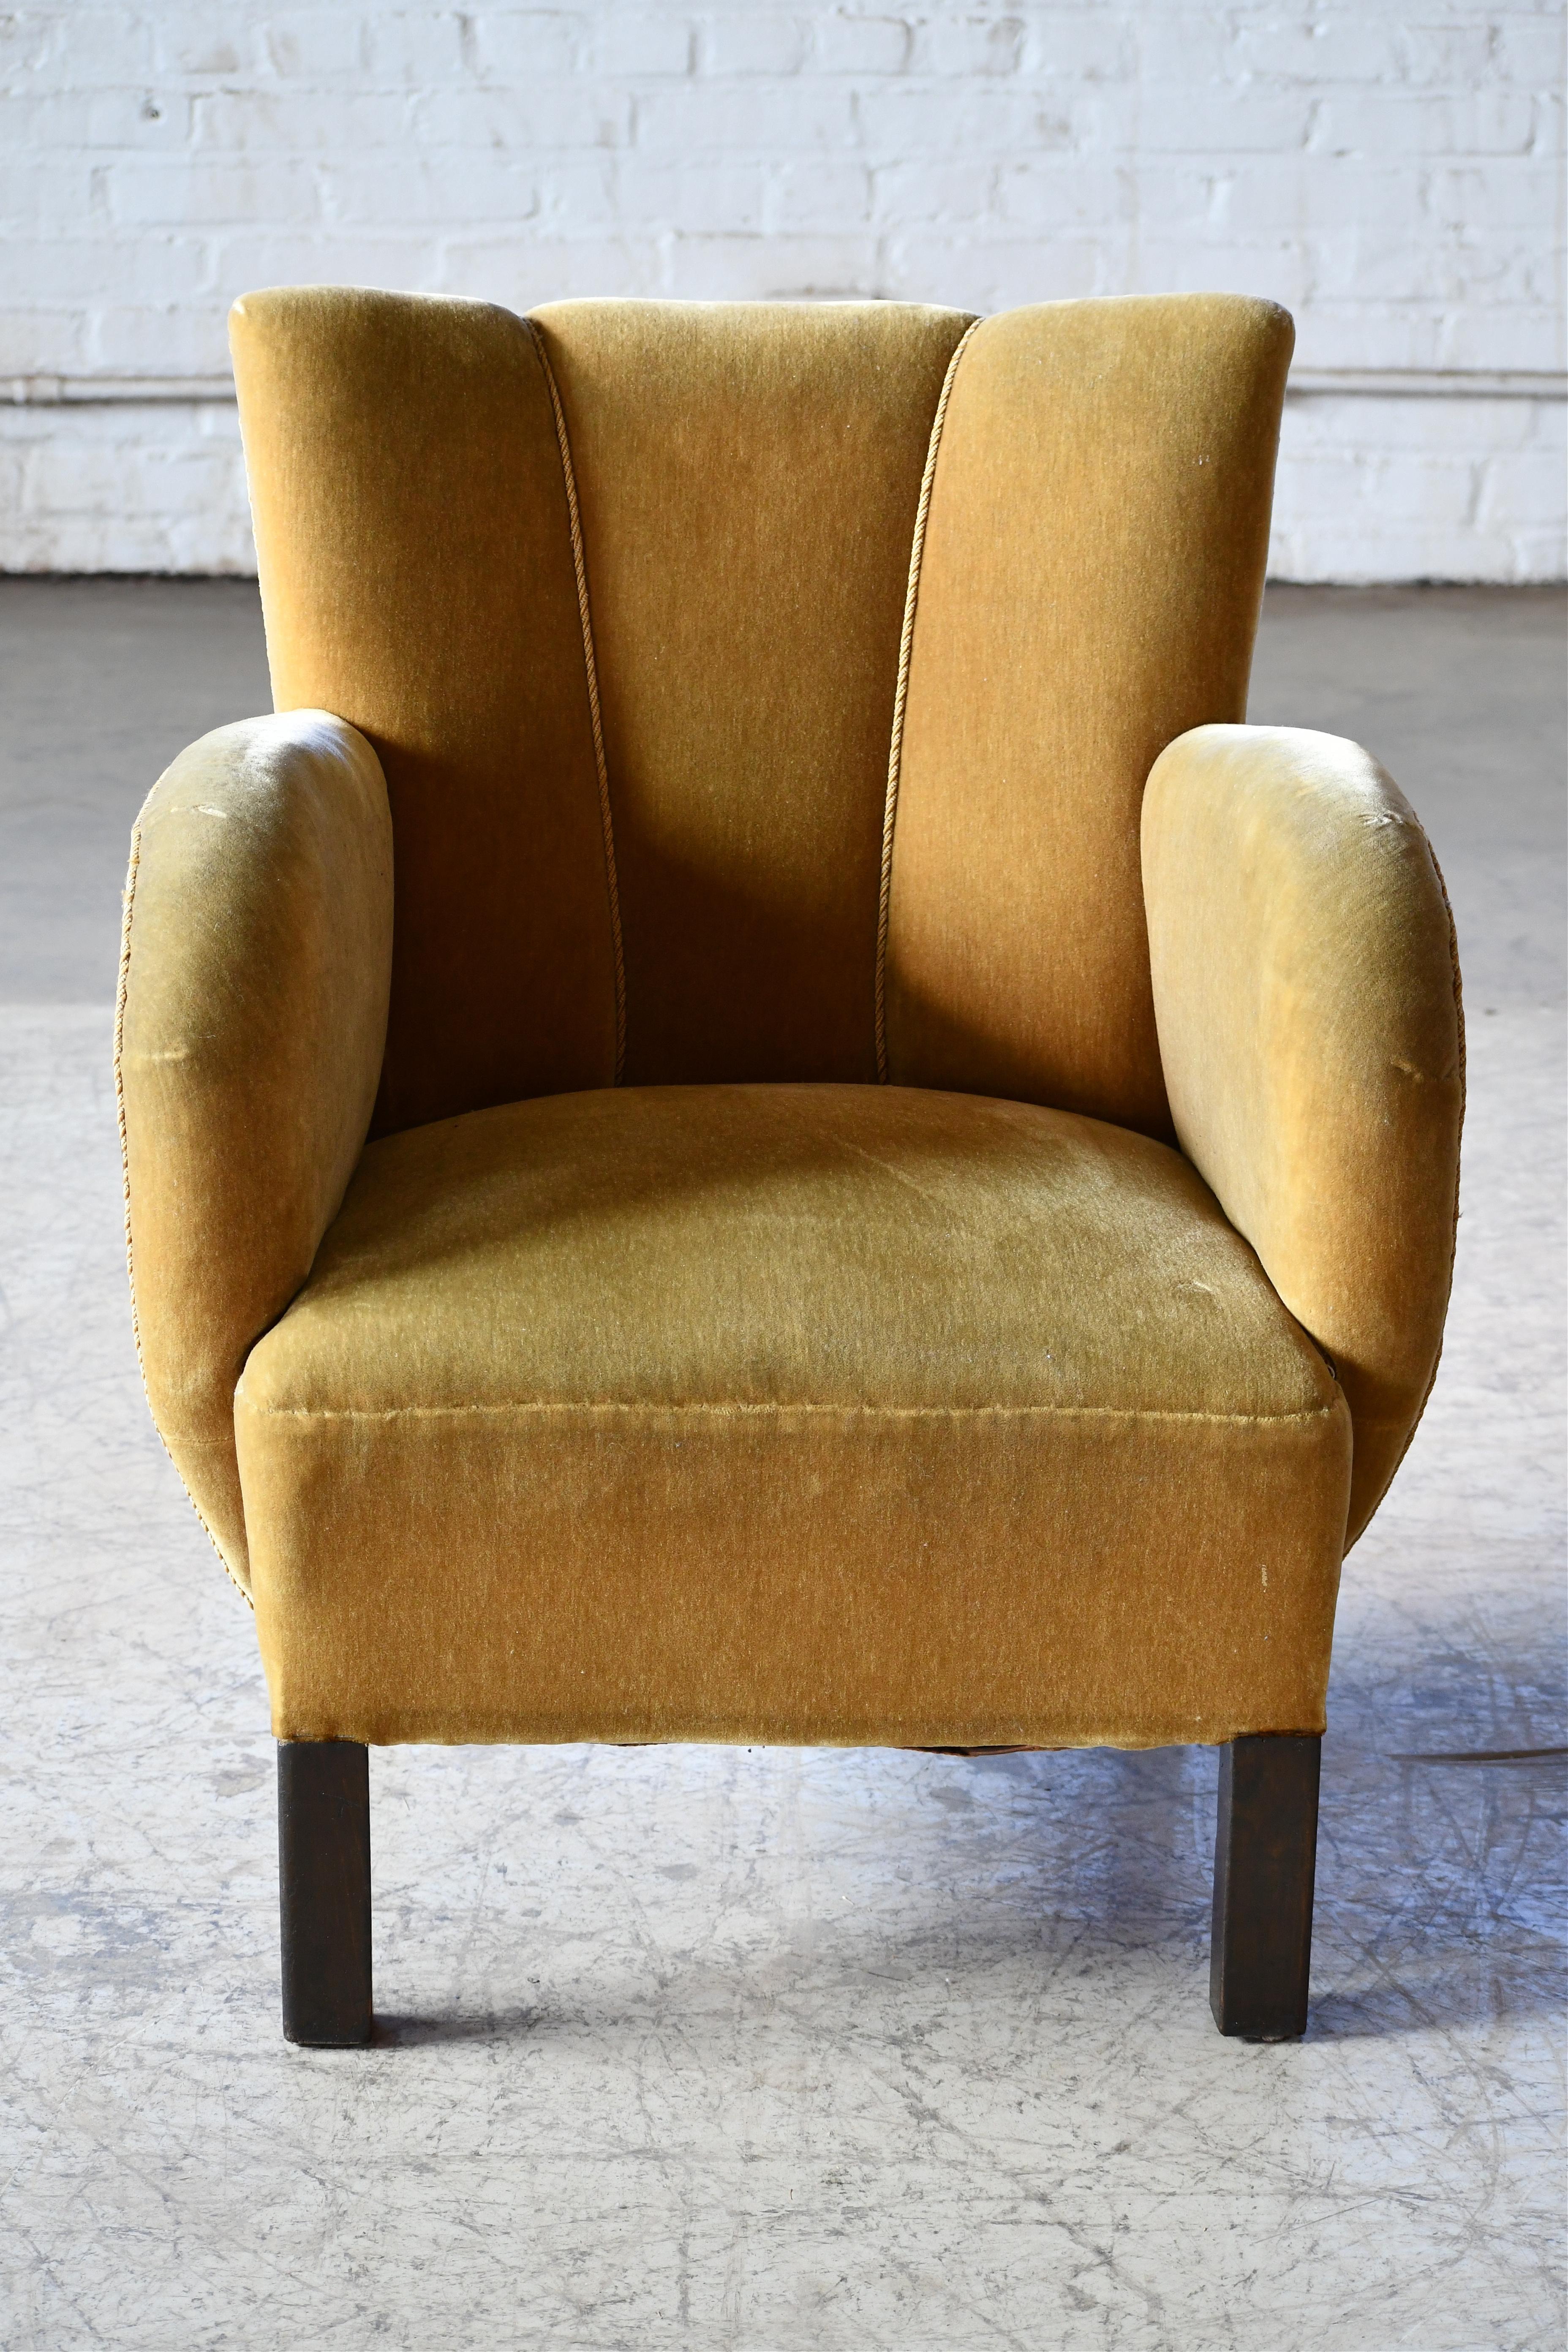 Super charming and very elegant  Danish small lounge chair from the late art deco period or early midcentury. The chair is unmarked but very likely made by Slagelse Mobelvaerk sometime in the 1930-40s. Very charming design with simple yet very